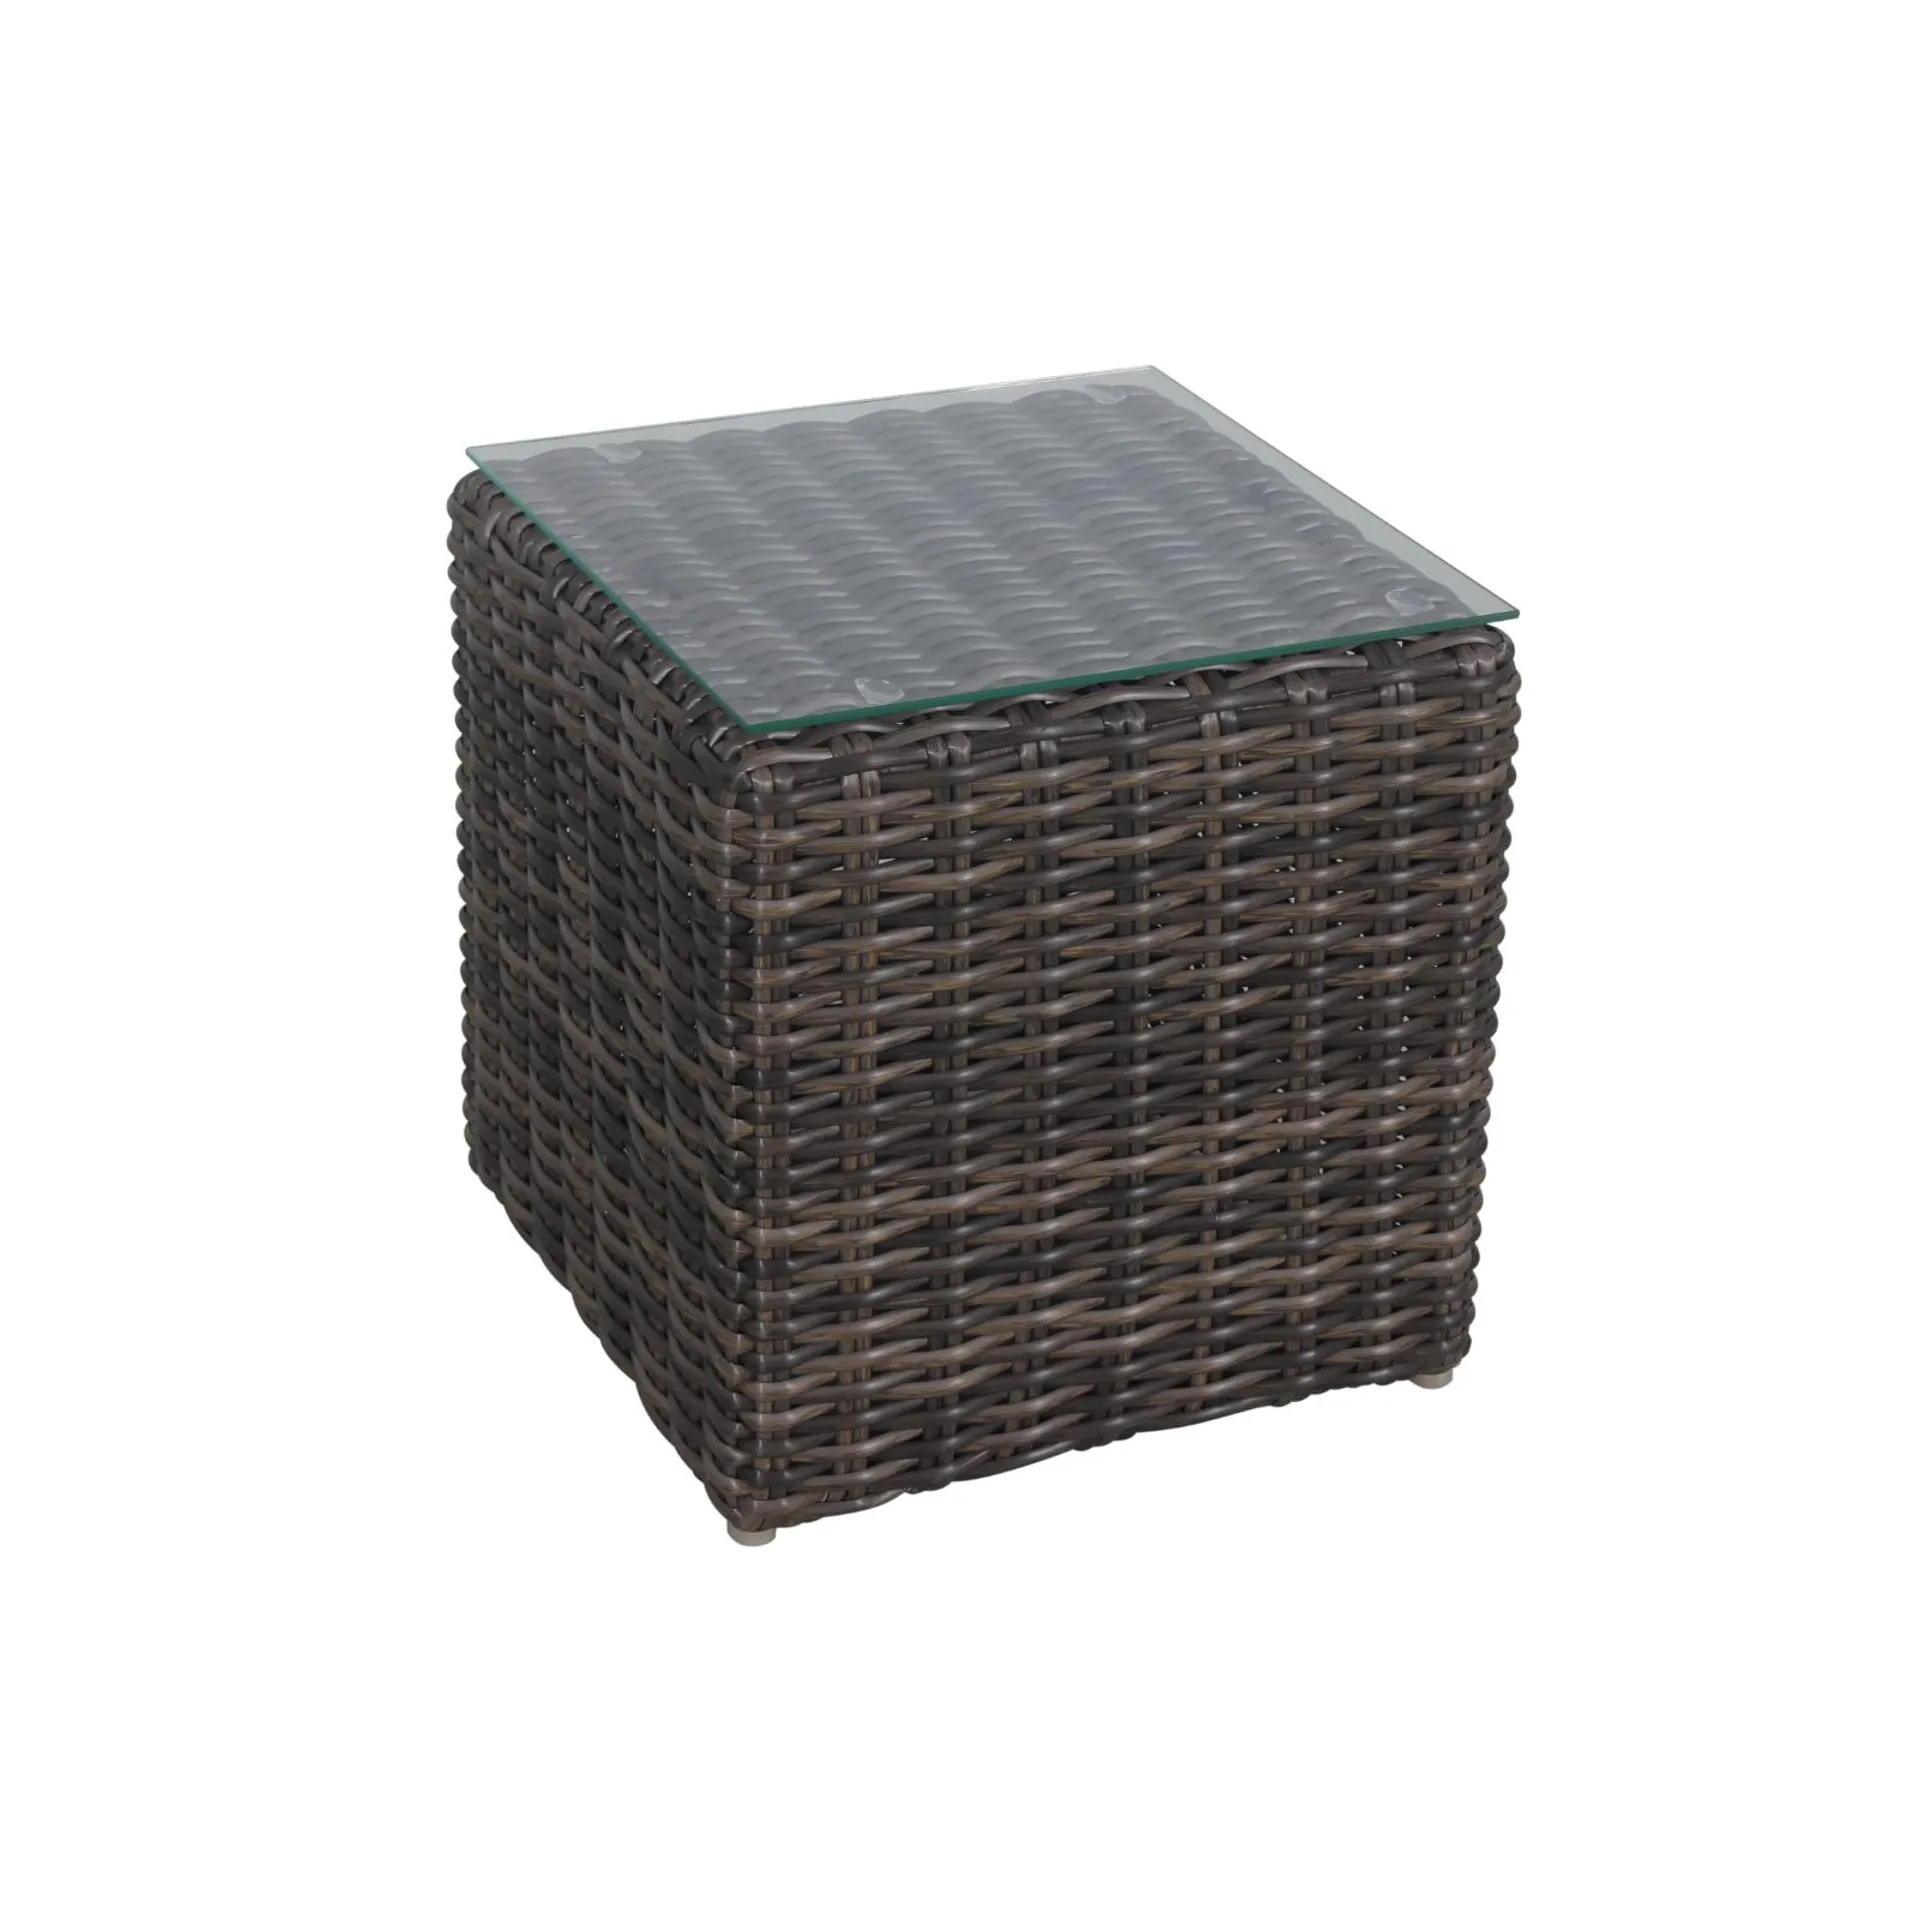 Cancun Outdoor Side Table / Stool